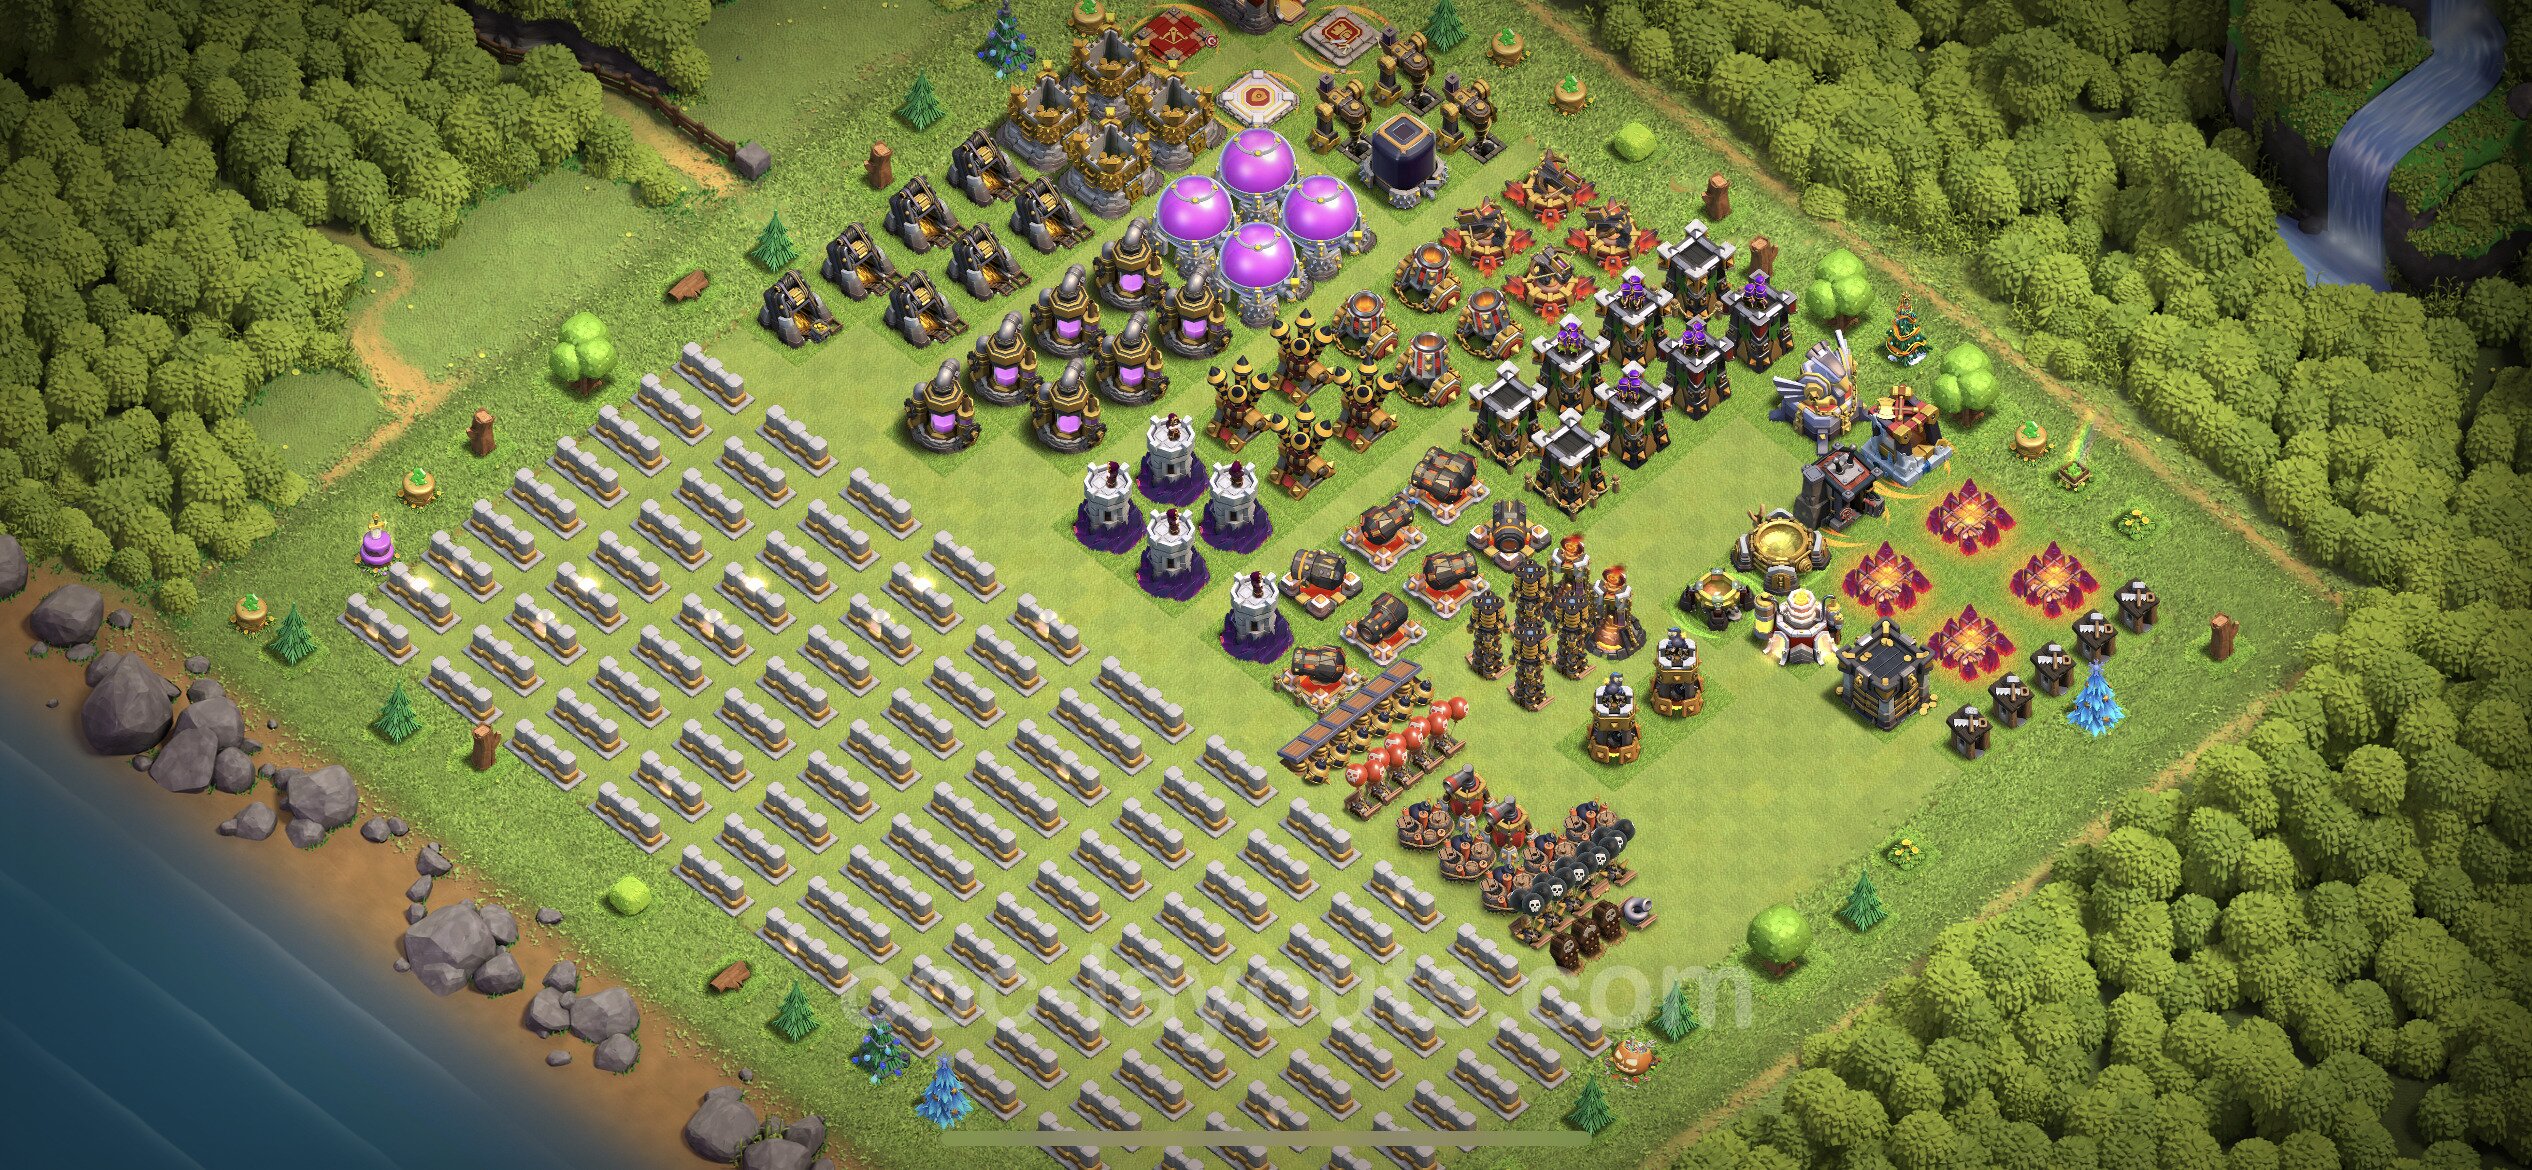 Best Funny Troll Base TH11 with Link 2022 - Town Hall Level 11 Art Base  Copy - (#15)